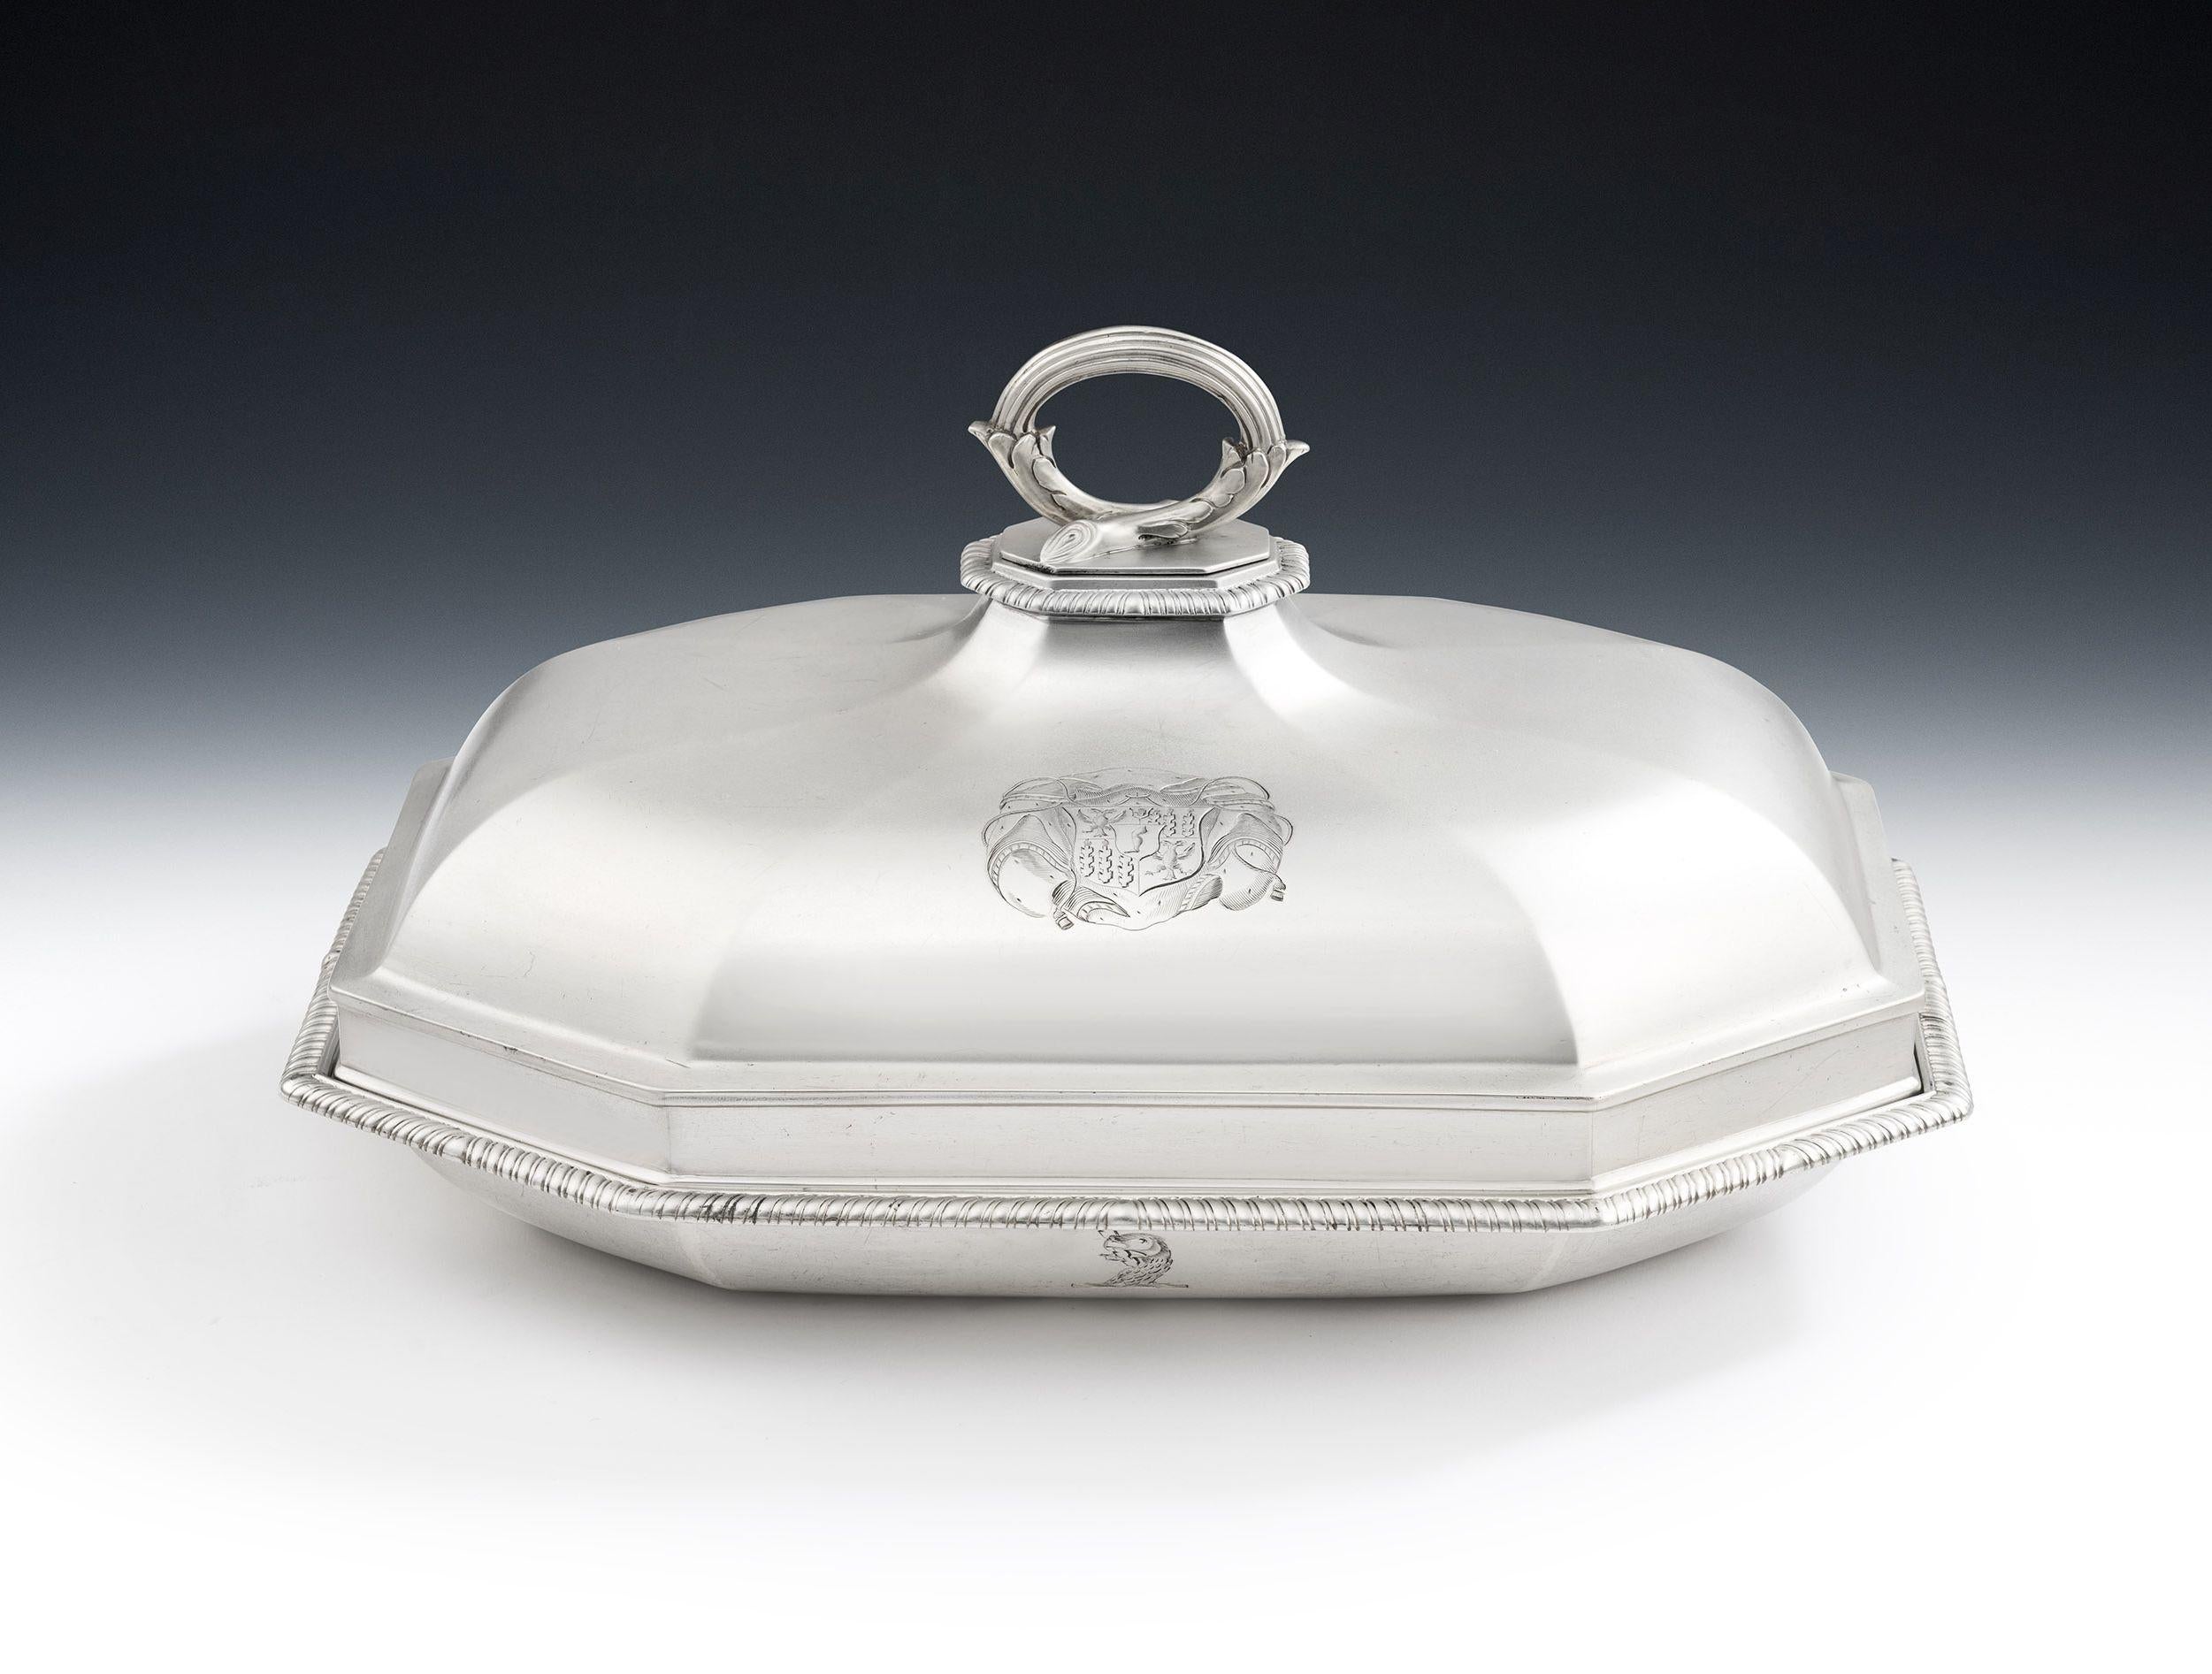 The Harwarden Castle Dishes. An exceptionally fine pair of George III Serving/Vegetable Dishes and Covers made in London in 1801 by Robert Sharp.

The Dishes are of an elegant elongated octagonal form.  The bases rise to a stepped rim decorated with